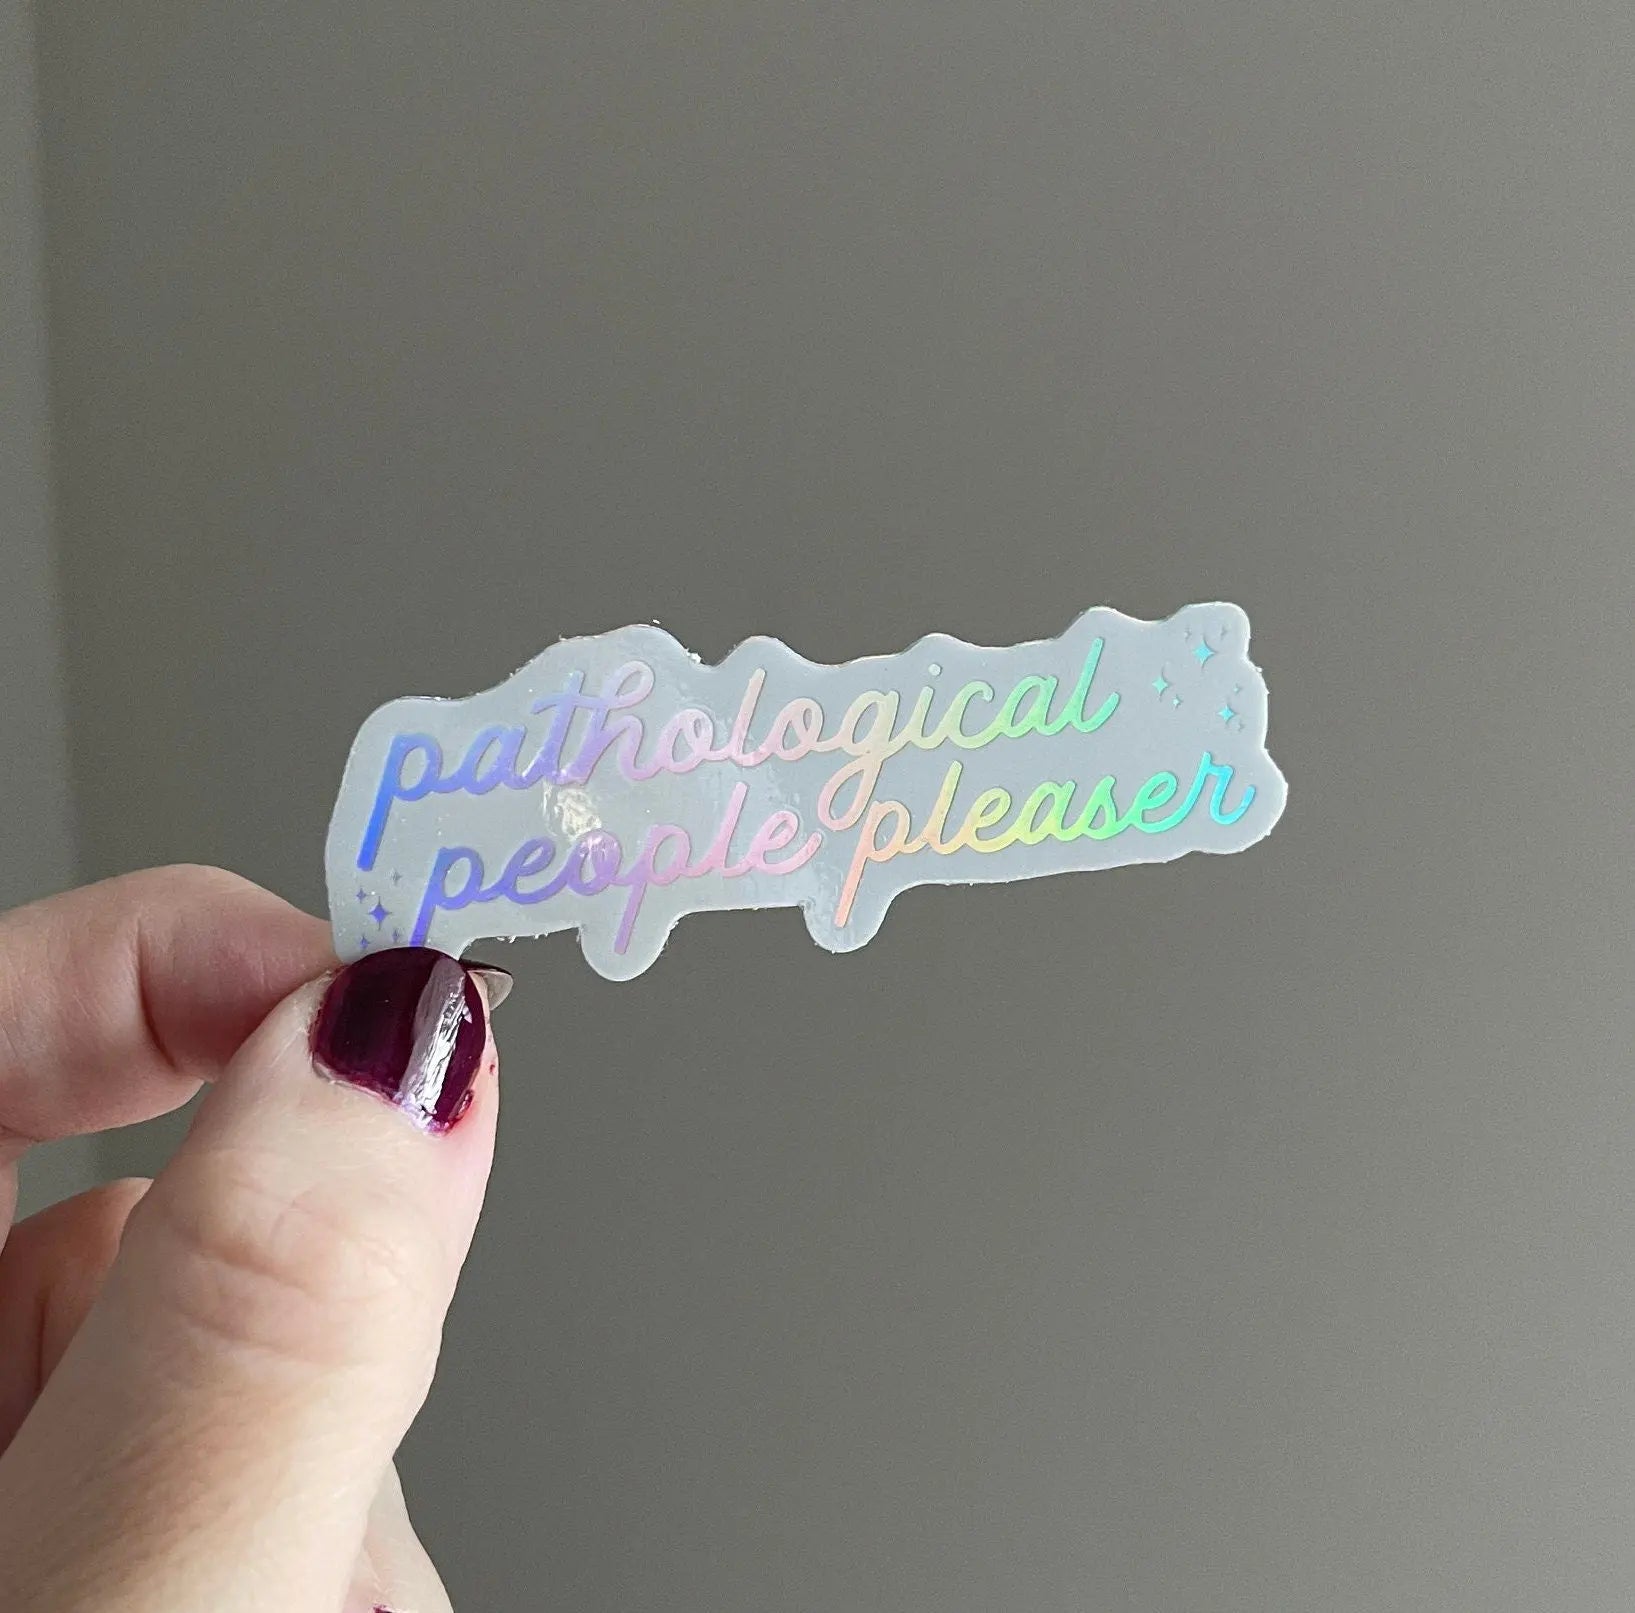 Holographic Pathological people pleaser sticker MangoIllustrated